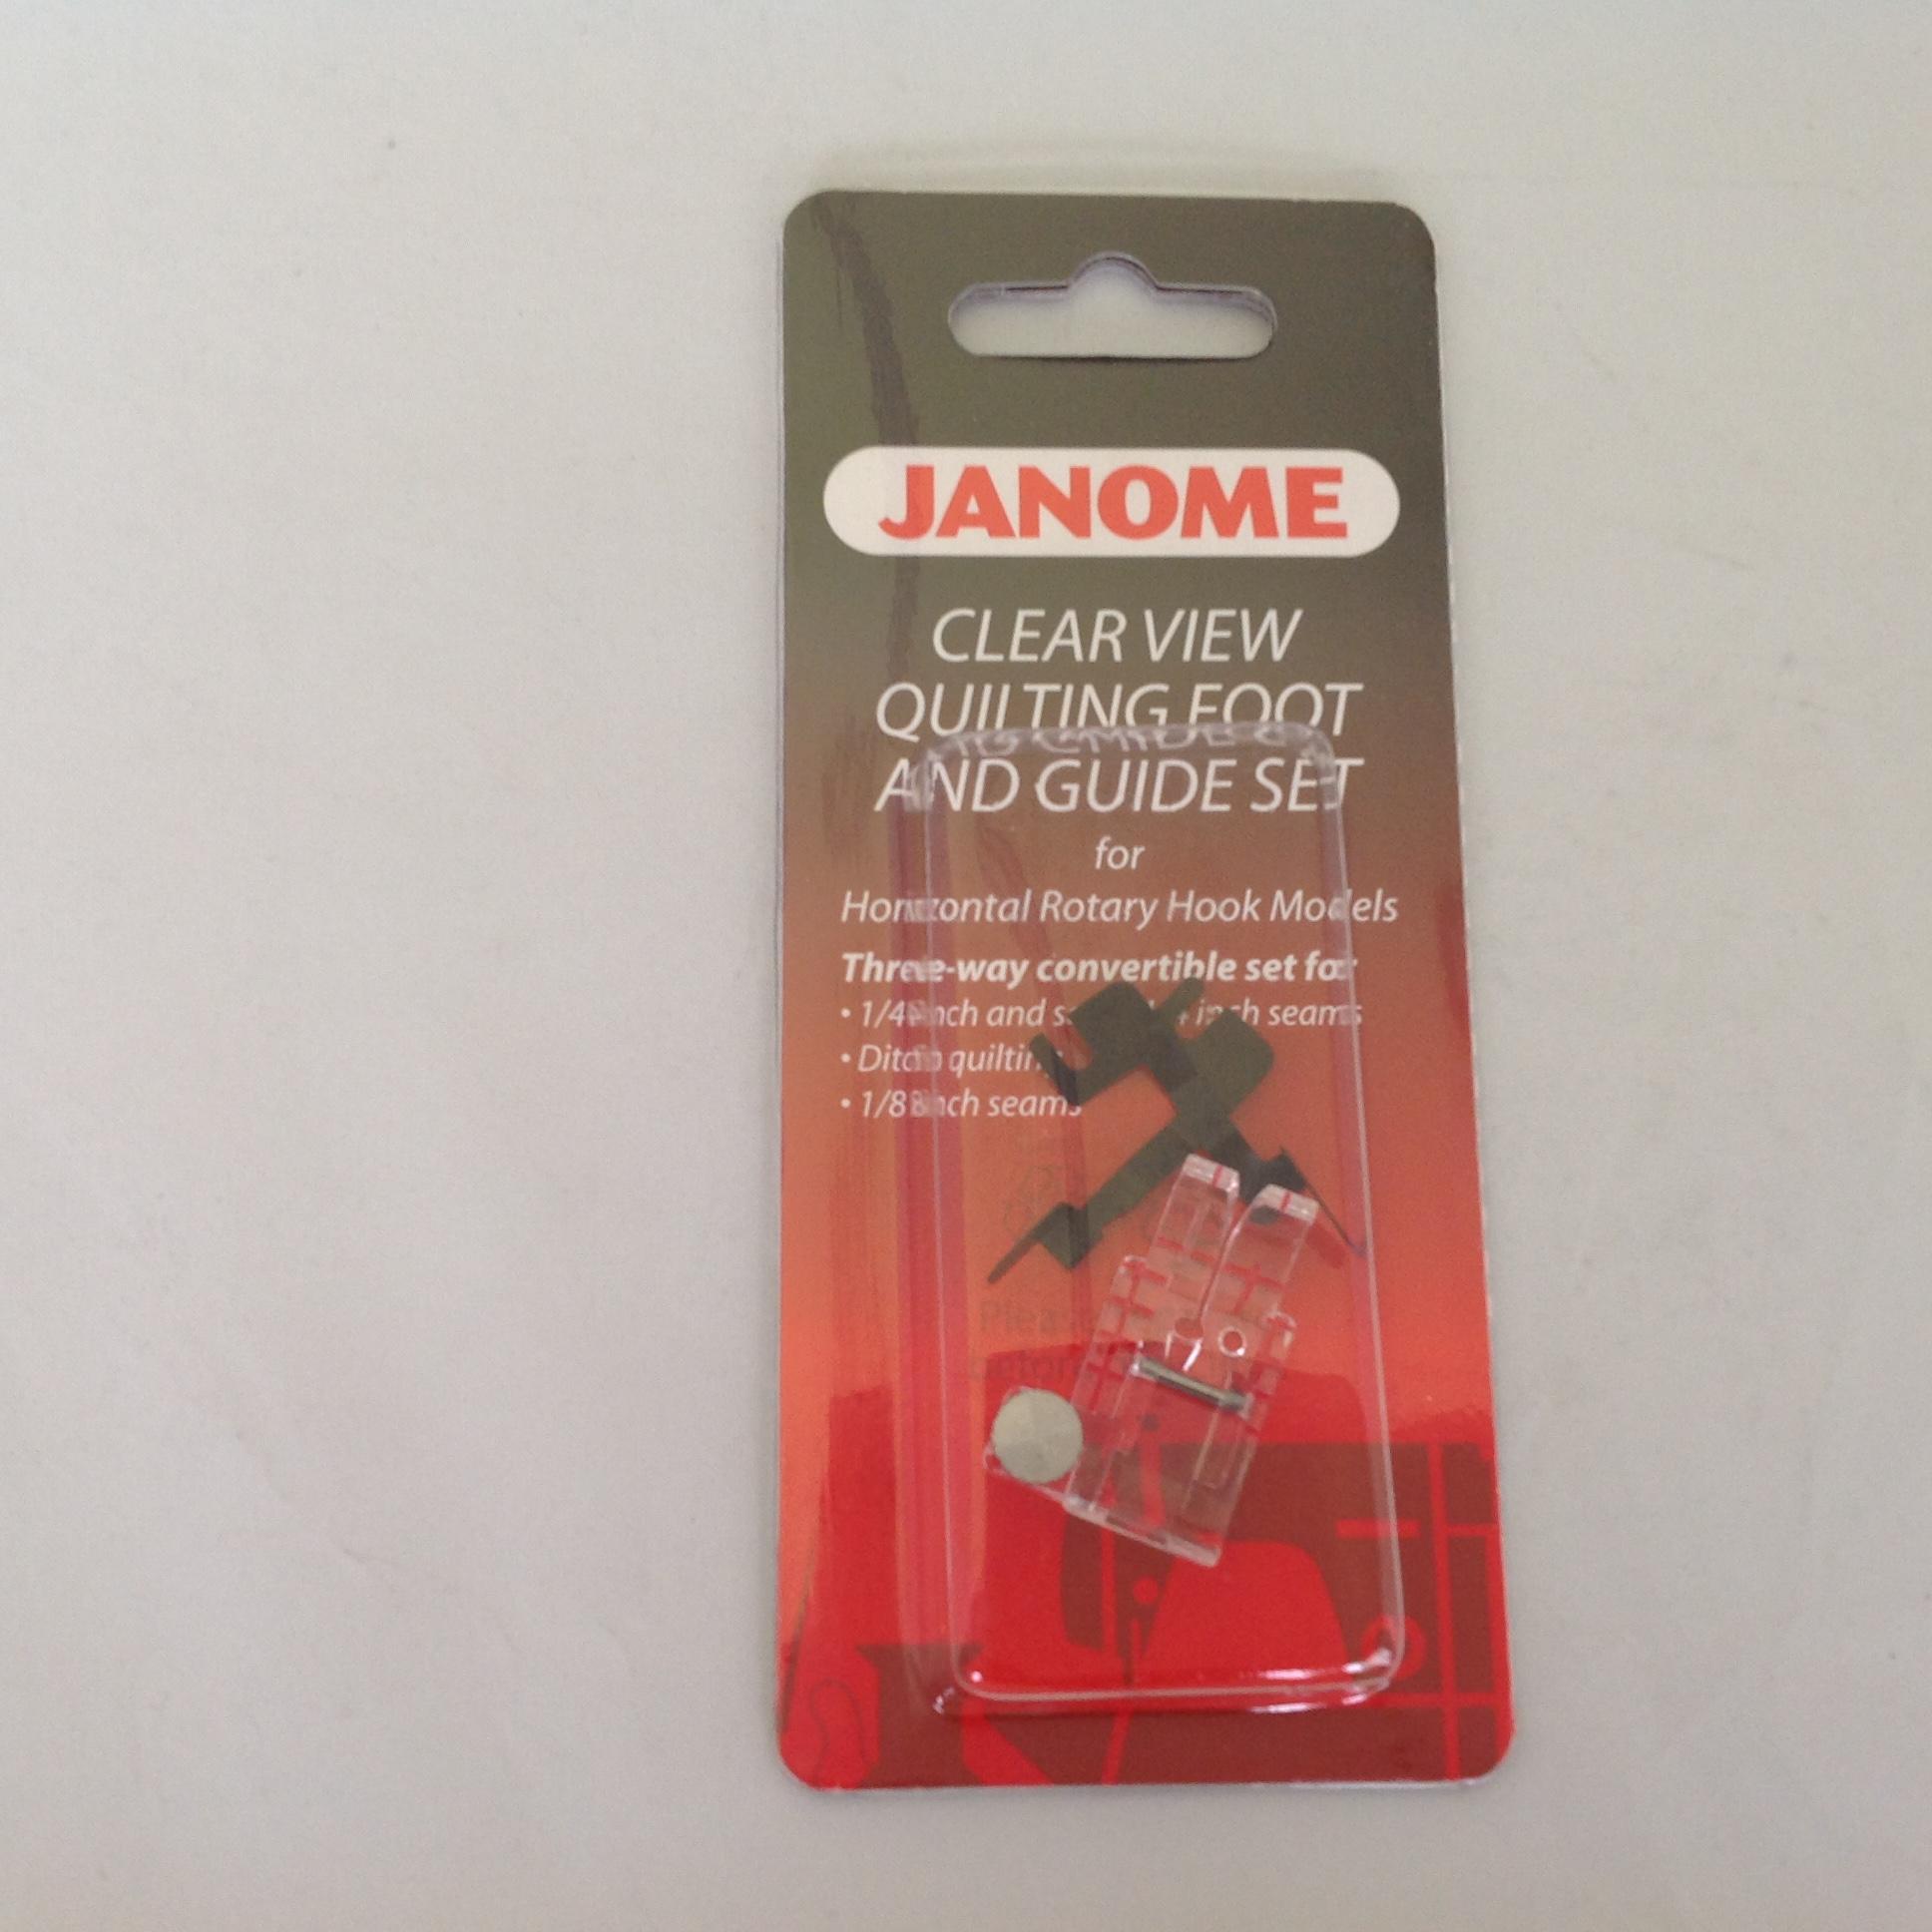 CLEAR VIEW QUILTING FOOT WITH GUIDE FOOT SET FOR JANOME#200449001 